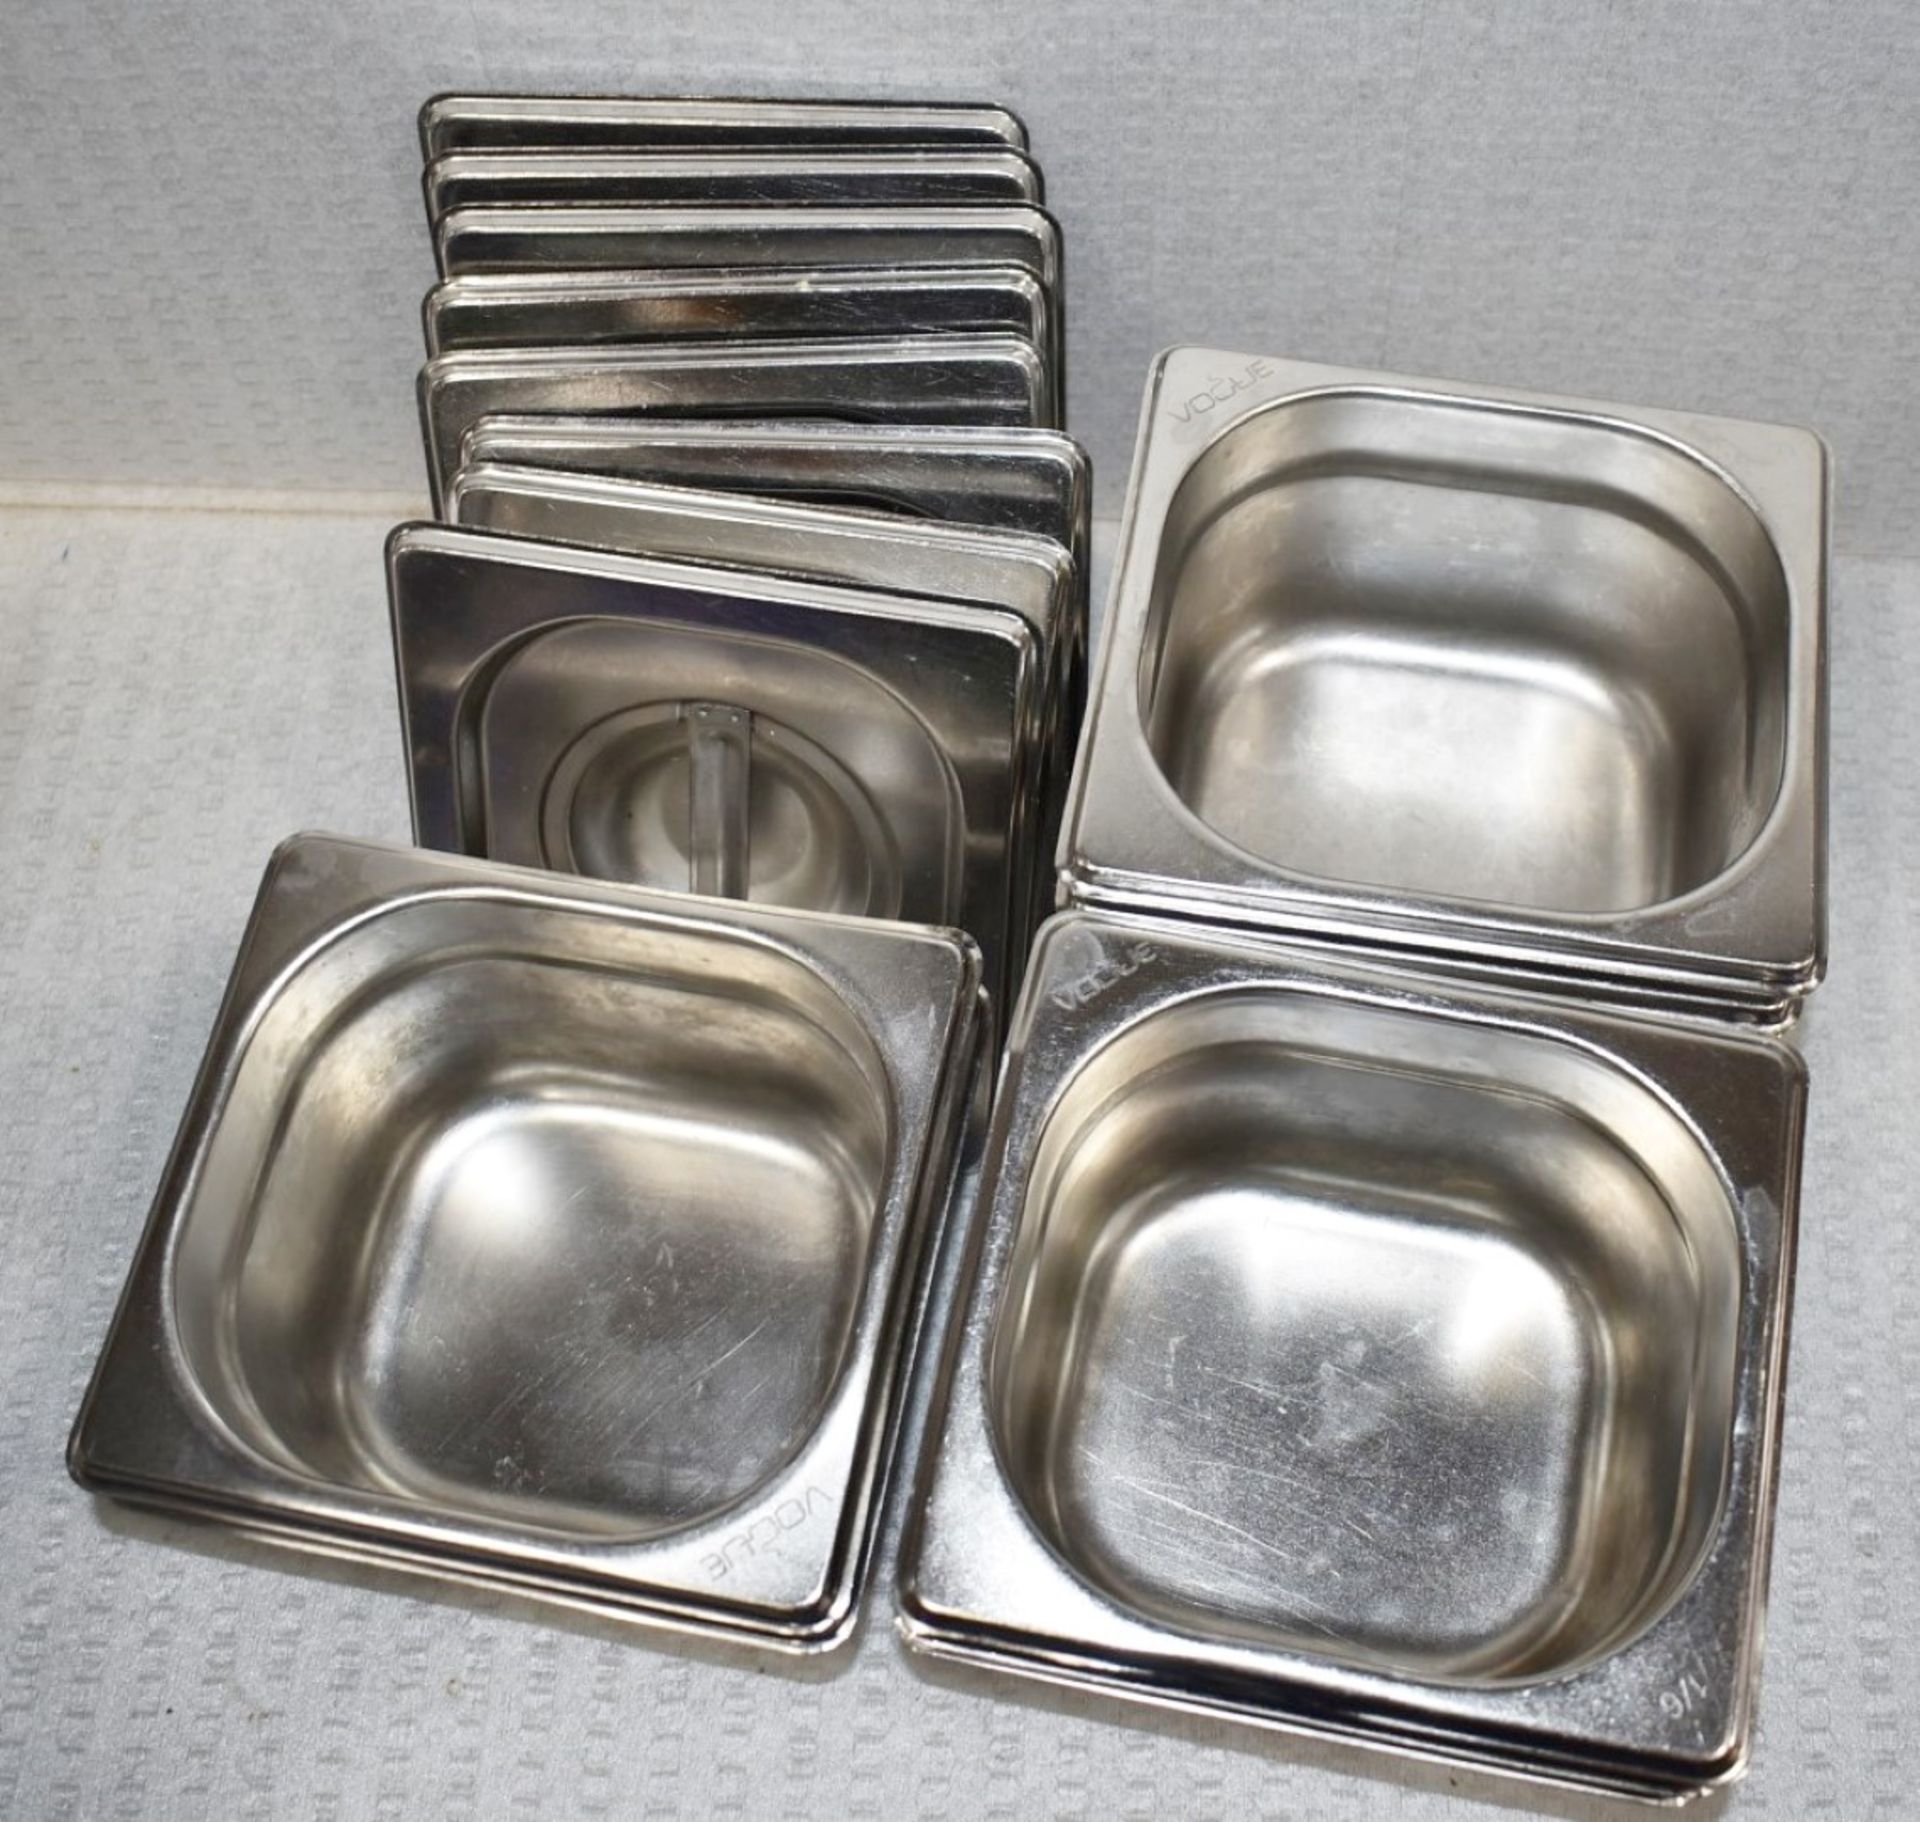 8 x Vogue Stainless Steel 1/6 Gastronorm Pans With Lids - Size: H10 x W16 x L17 cms - Recently - Image 3 of 4